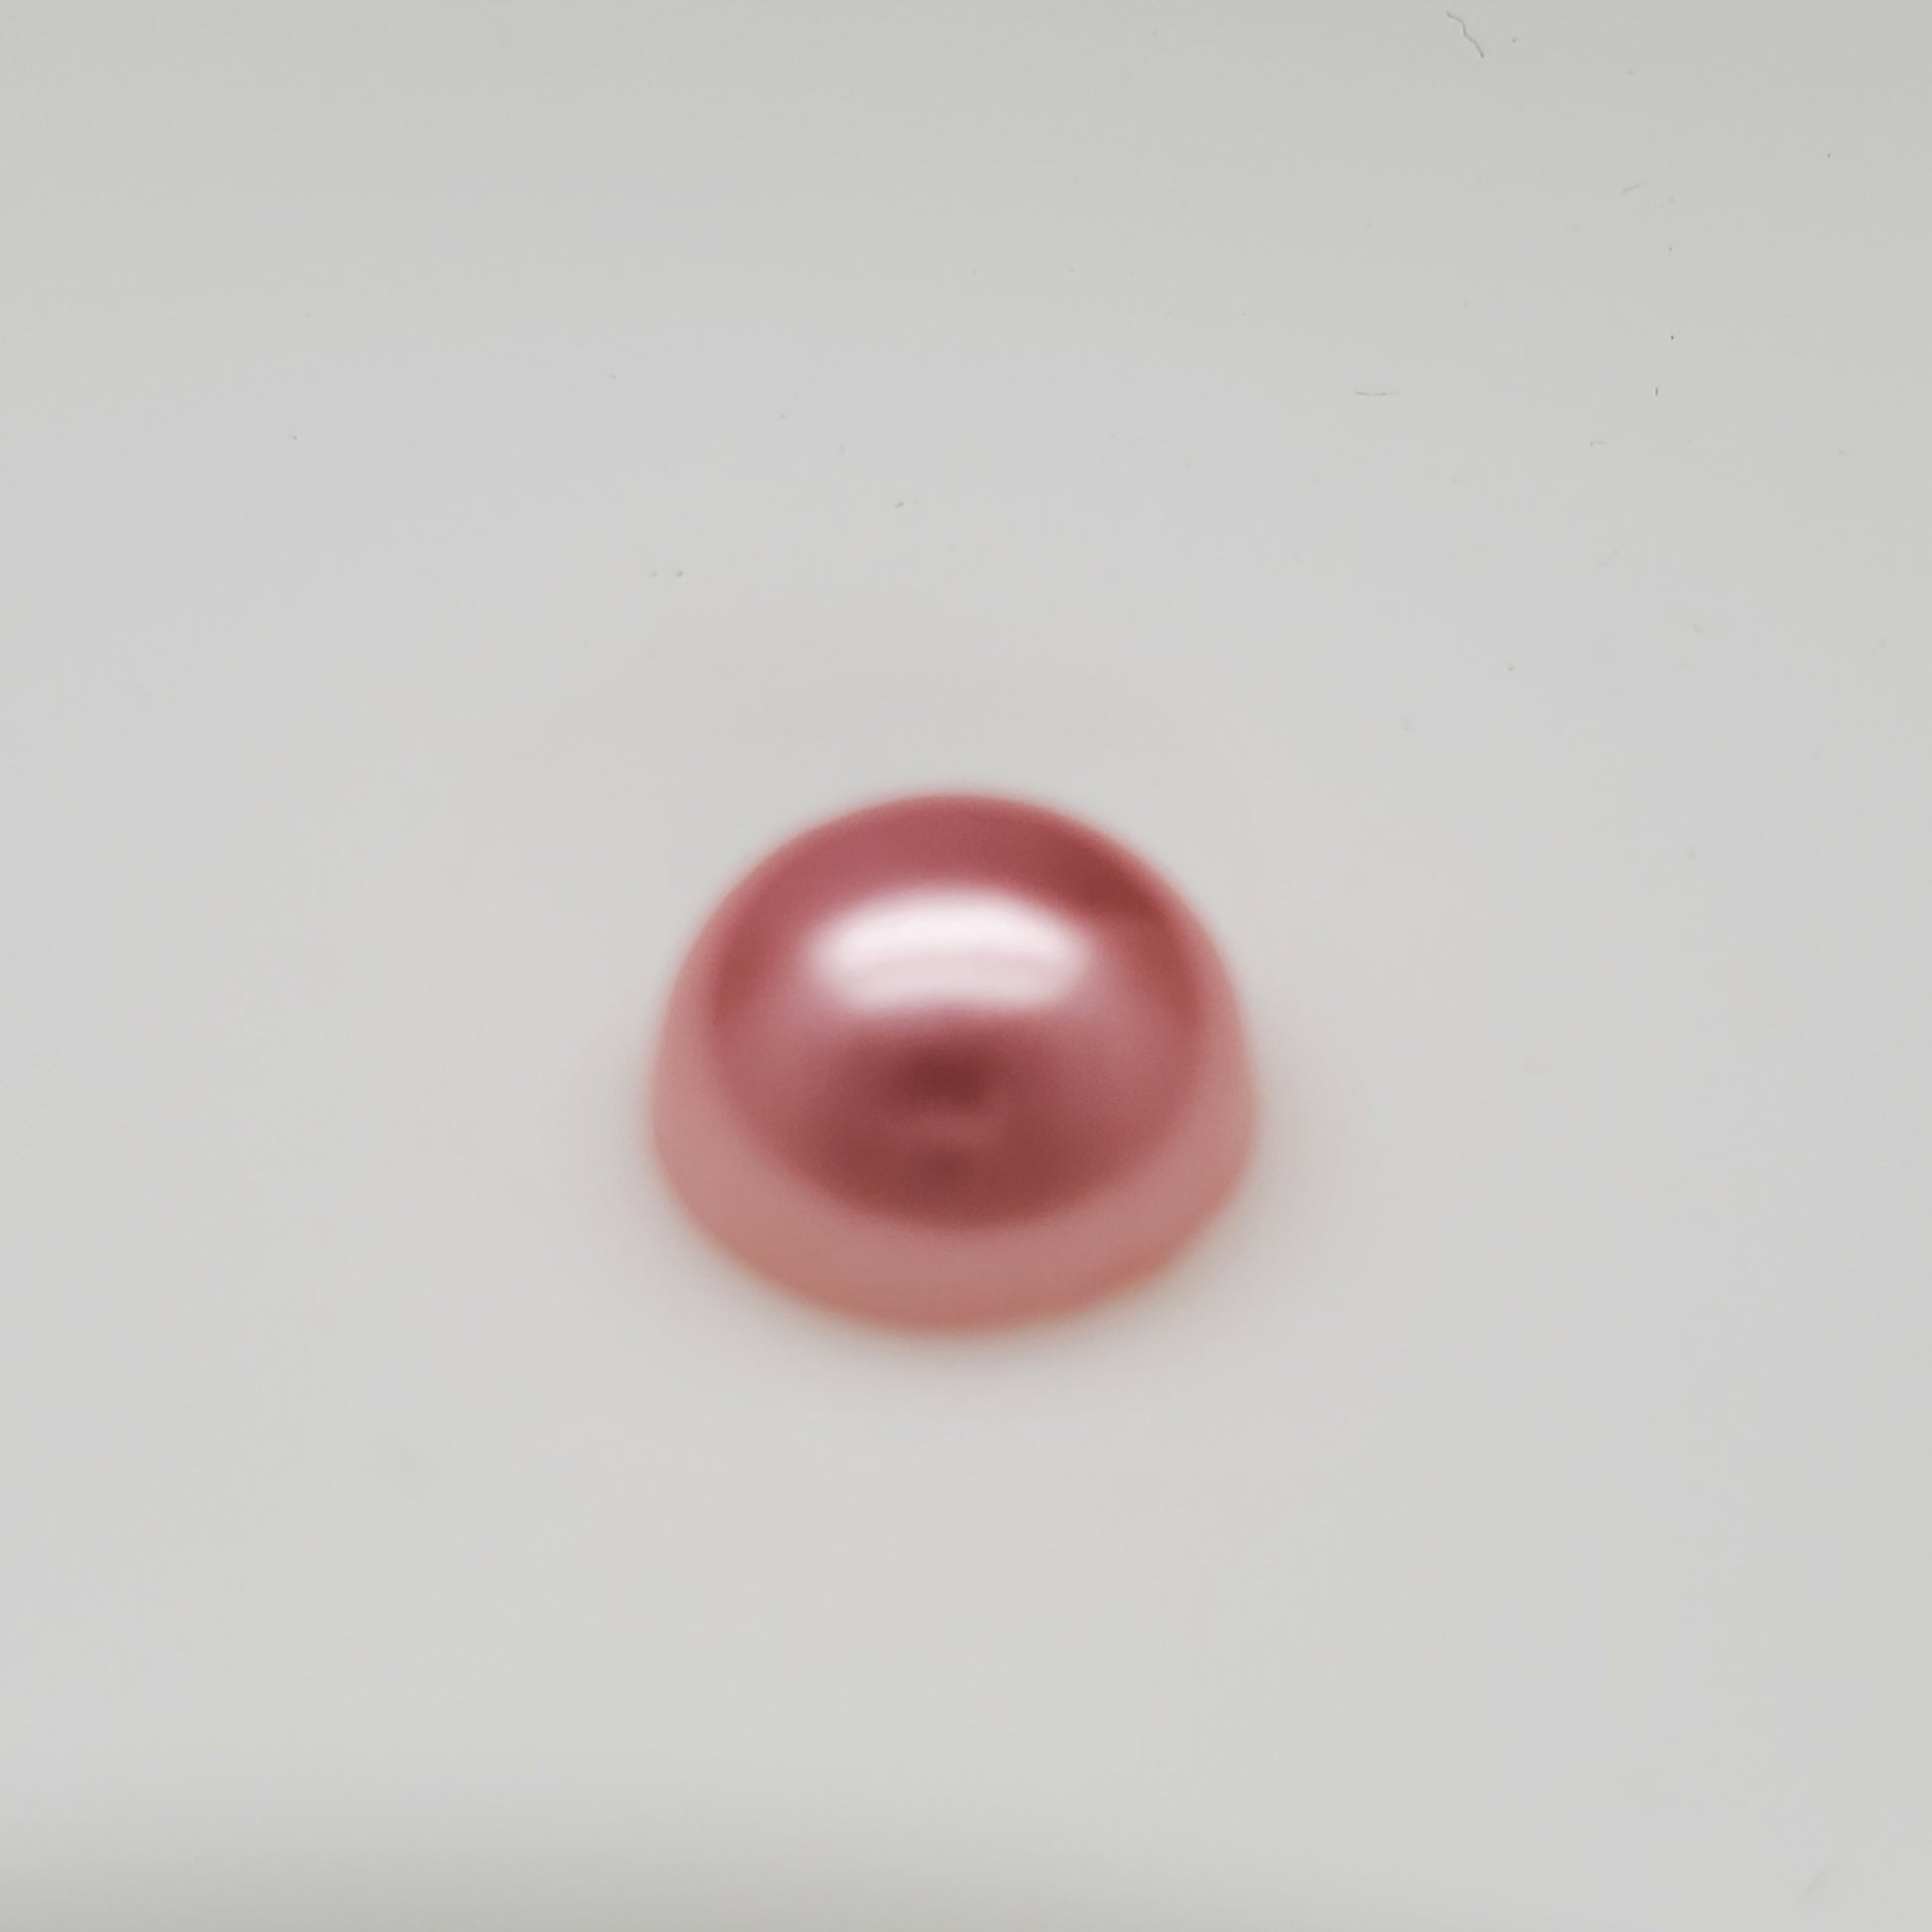 Be Createful - Red Resin Decoden Cabochon Flatback Pearls